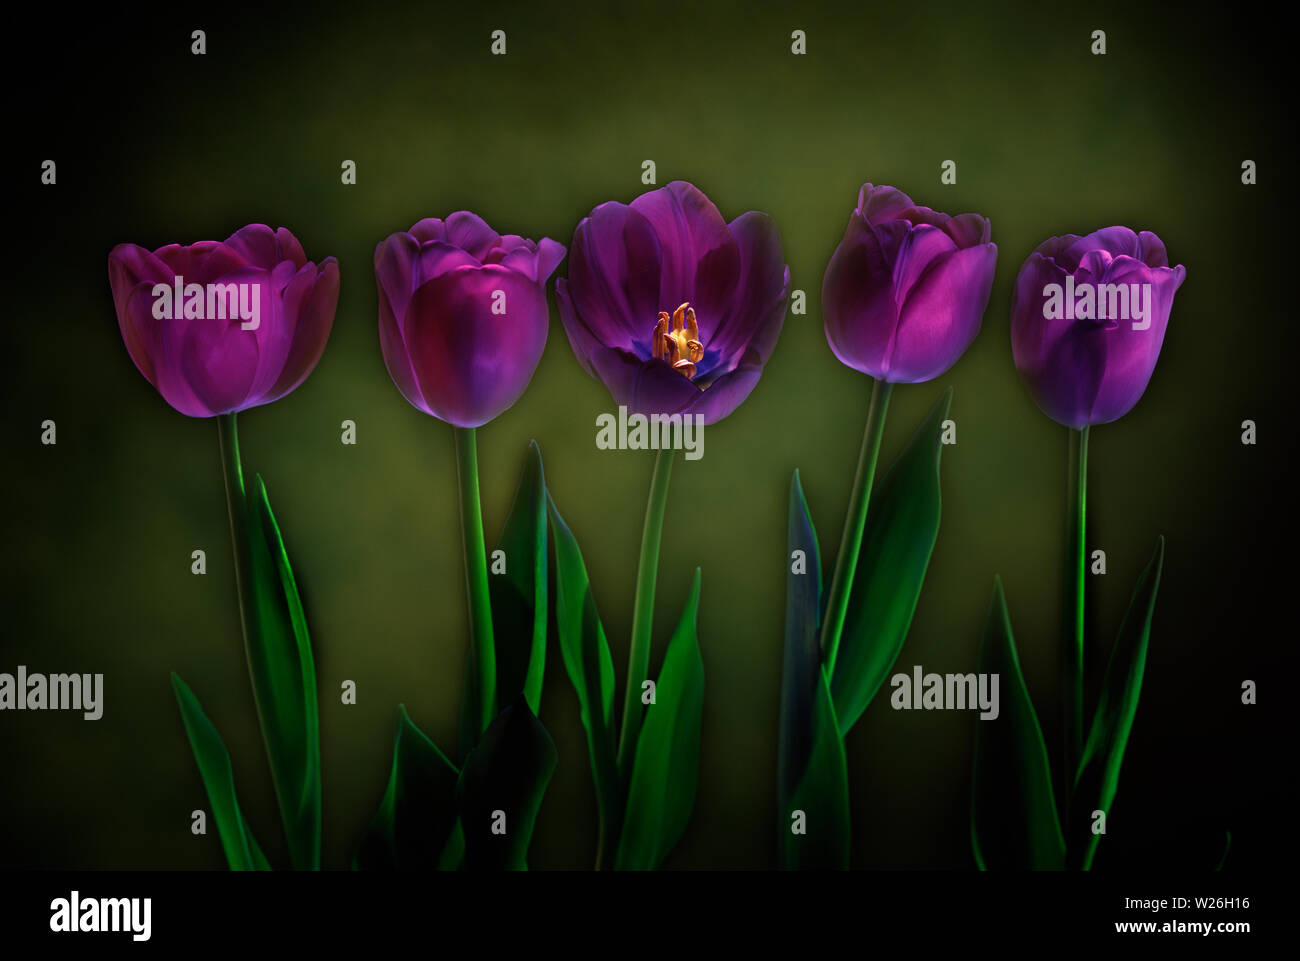 A row of purple tulips as part of a series of light painted flowers in studio. Stock Photo